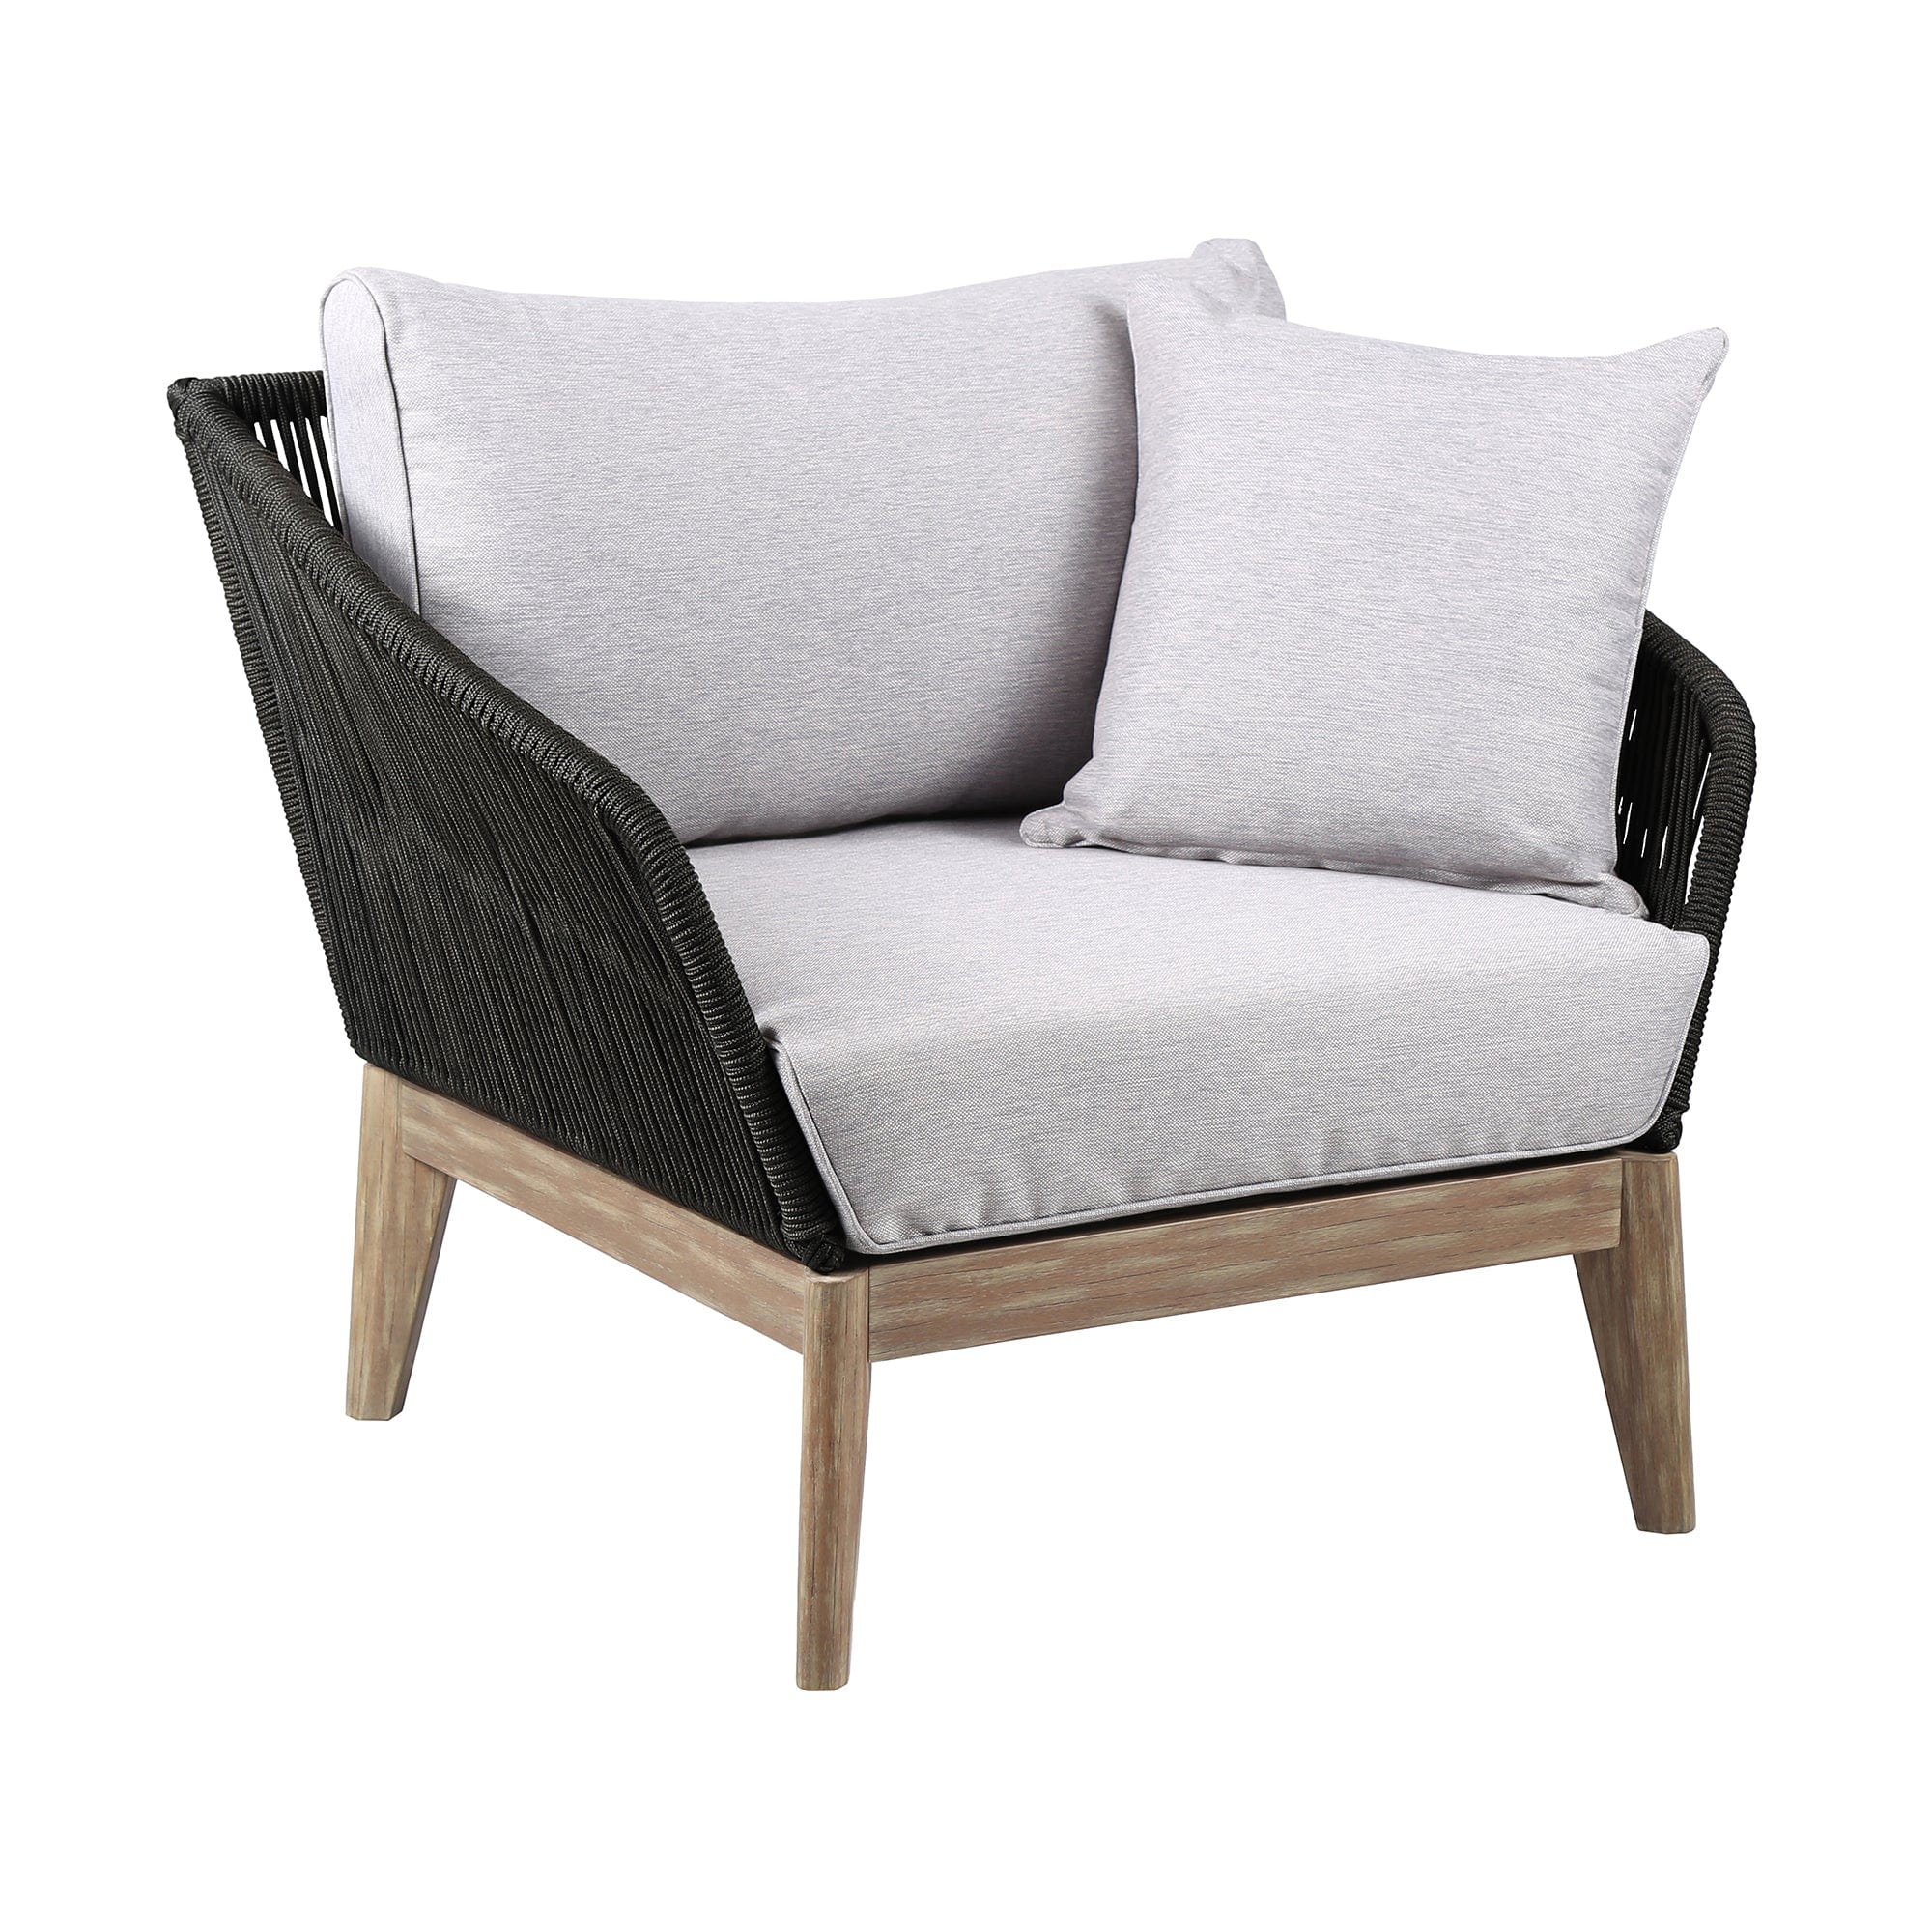 Armen Living Outdoor Lounge Chair Armen Living | Athos Indoor Outdoor Club Chair in Light/Dark Eucalyptus Wood with Latte Rope and Grey Cushions | LCATCHWD